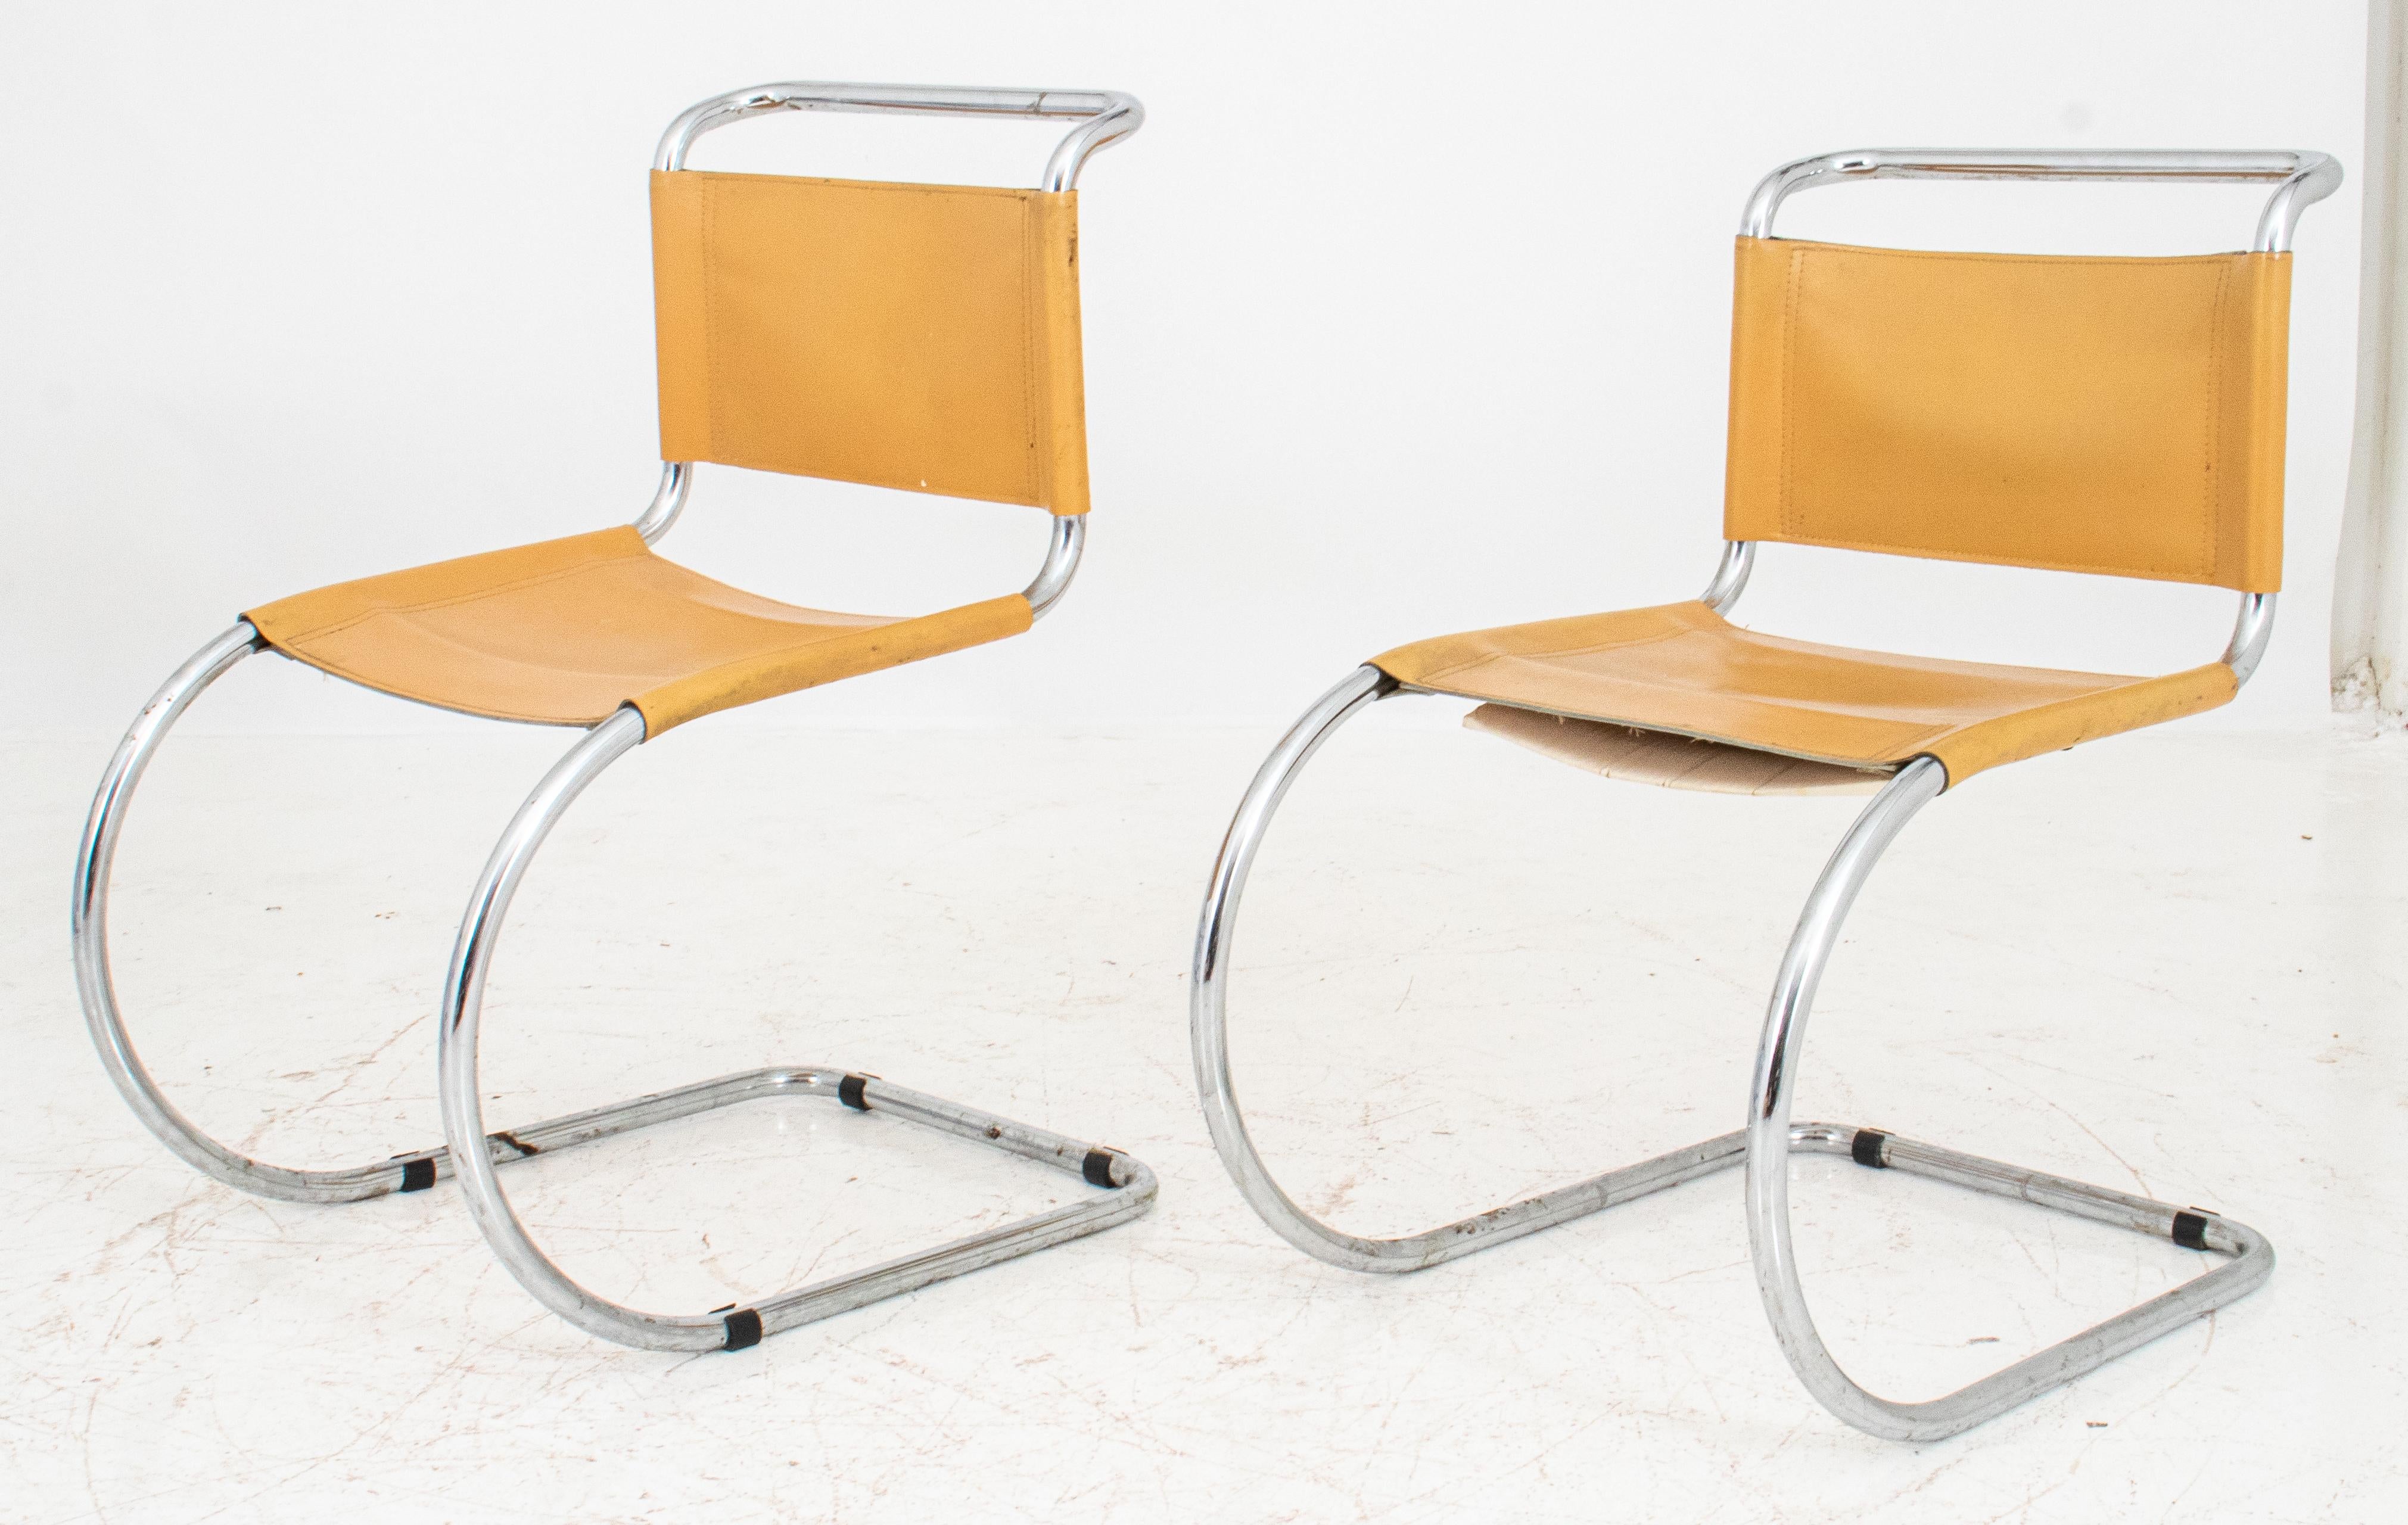 Modern Mies van der Rohe MR Cantilever Chairs, 2